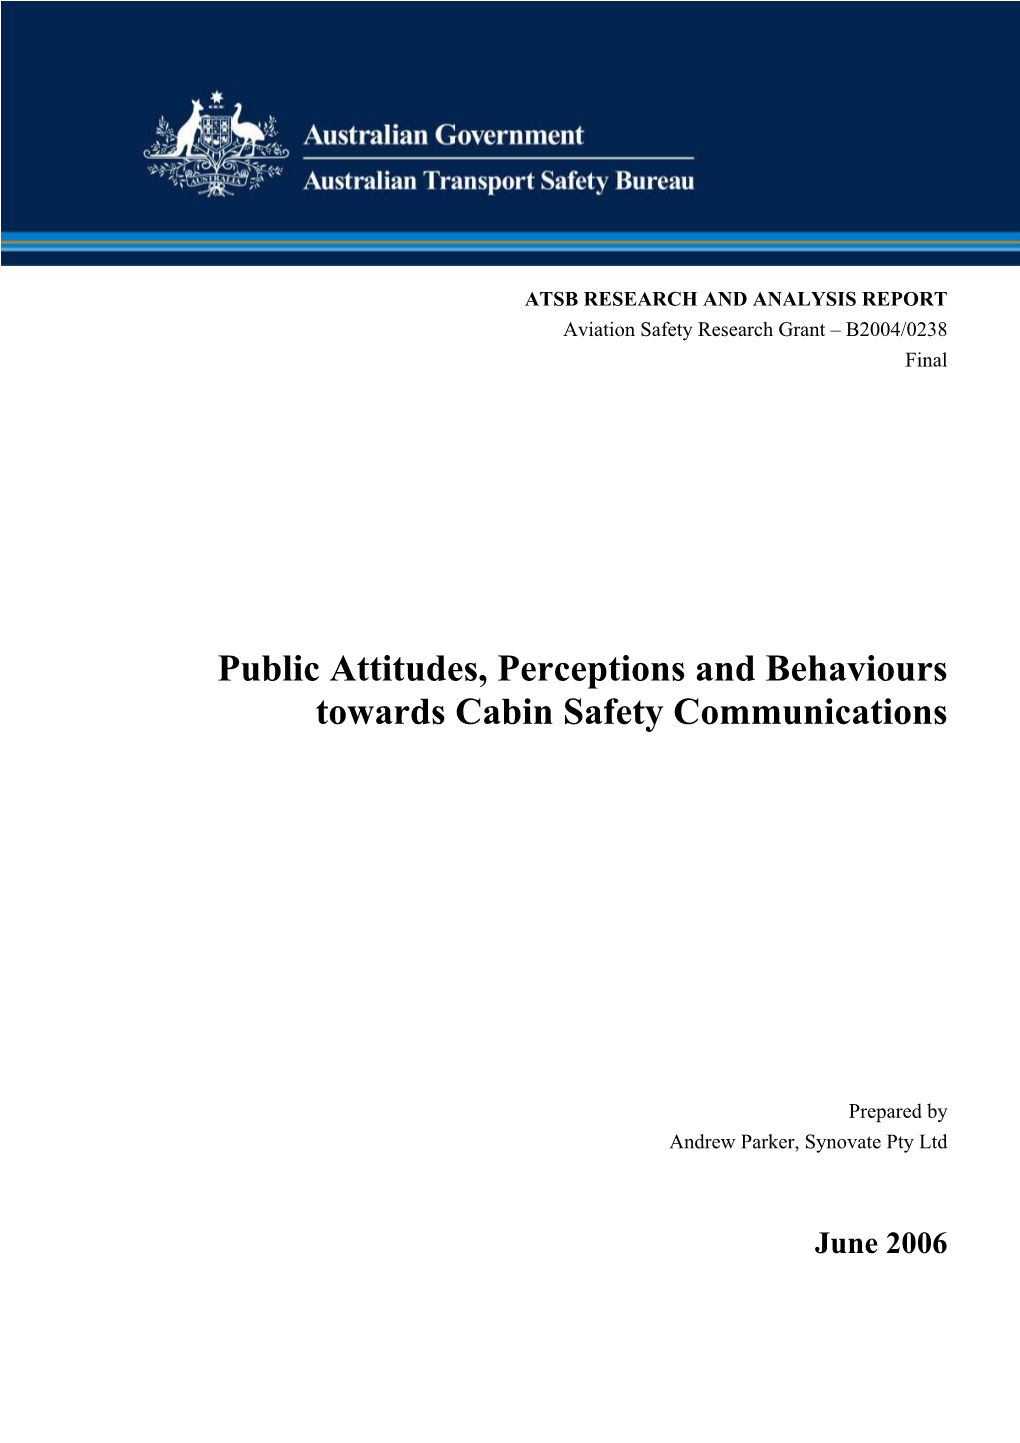 Public Attitudes, Perceptions and Behaviours Towards Cabin Safety Communications